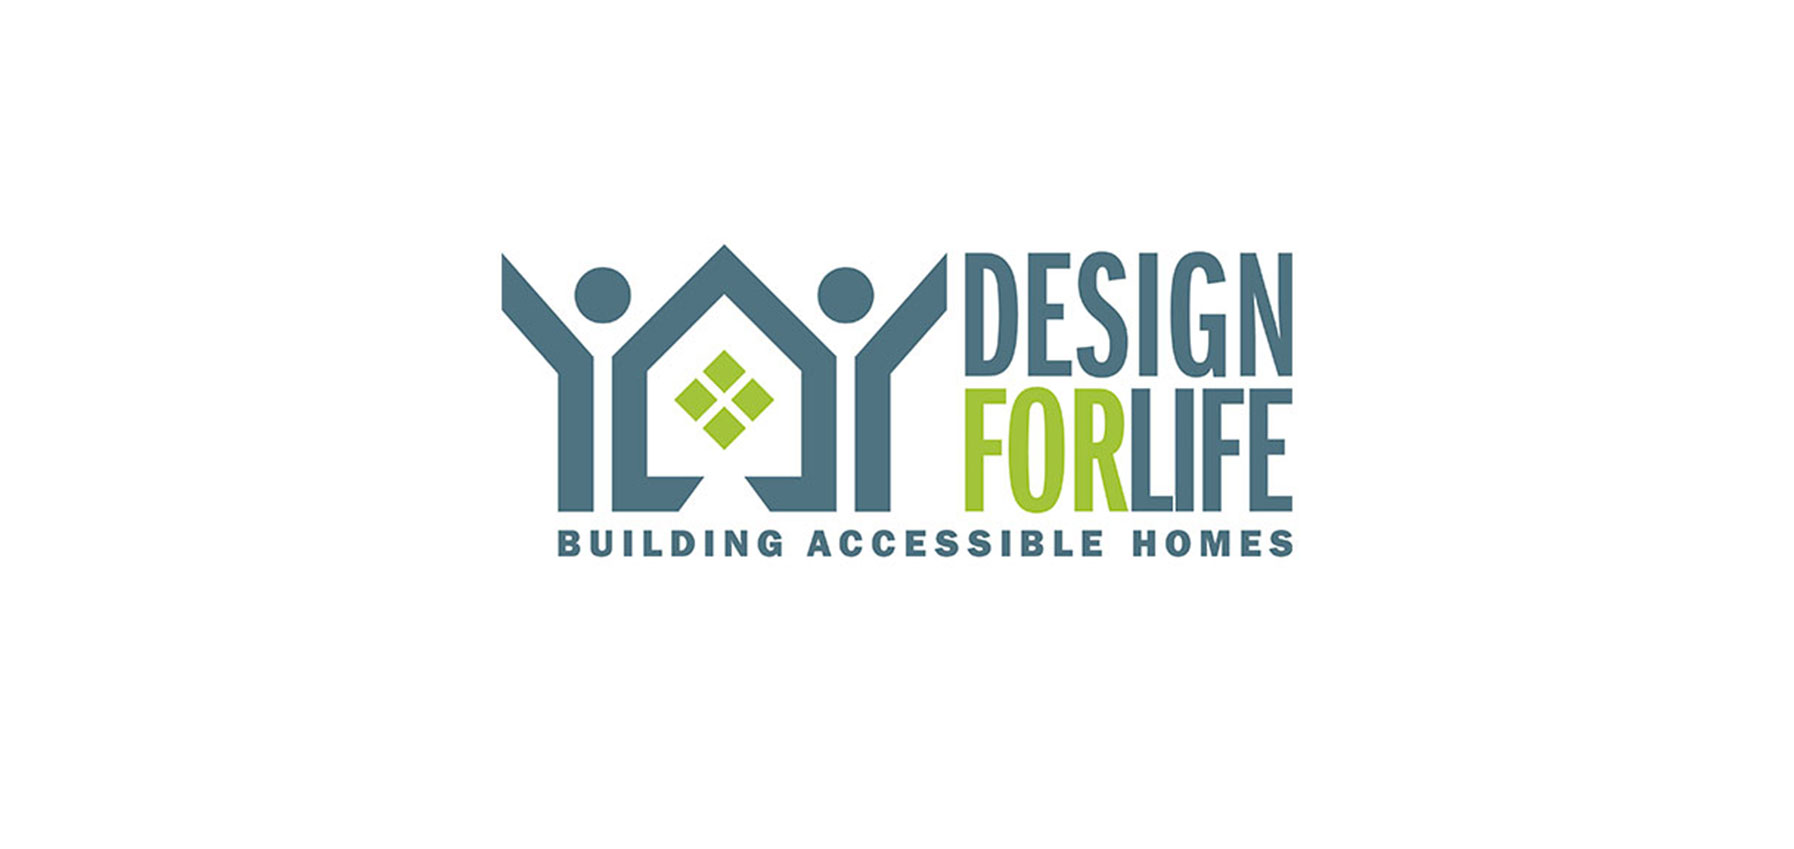 Design For Life - Building Accessible Homes , logo shows stylized house and couple